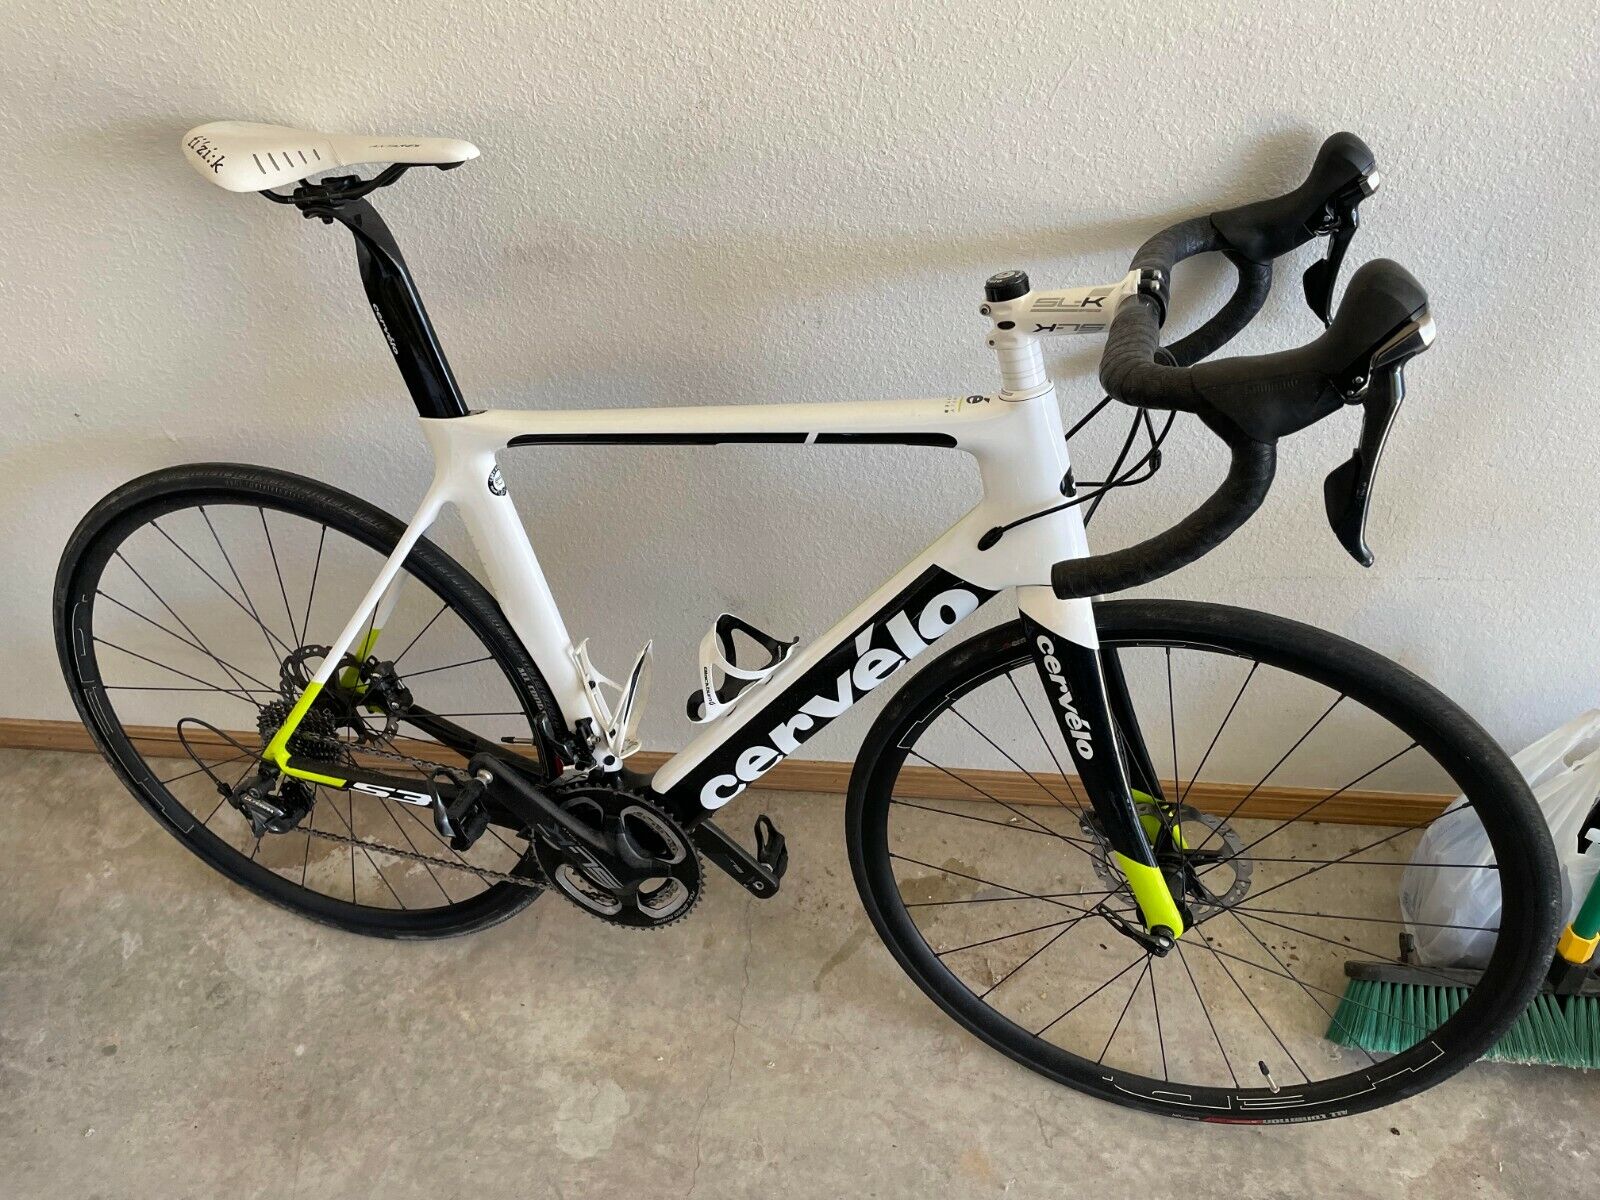 Bicycle for Sale: Cervelo s3 racing bike in Rogers, Arkansas